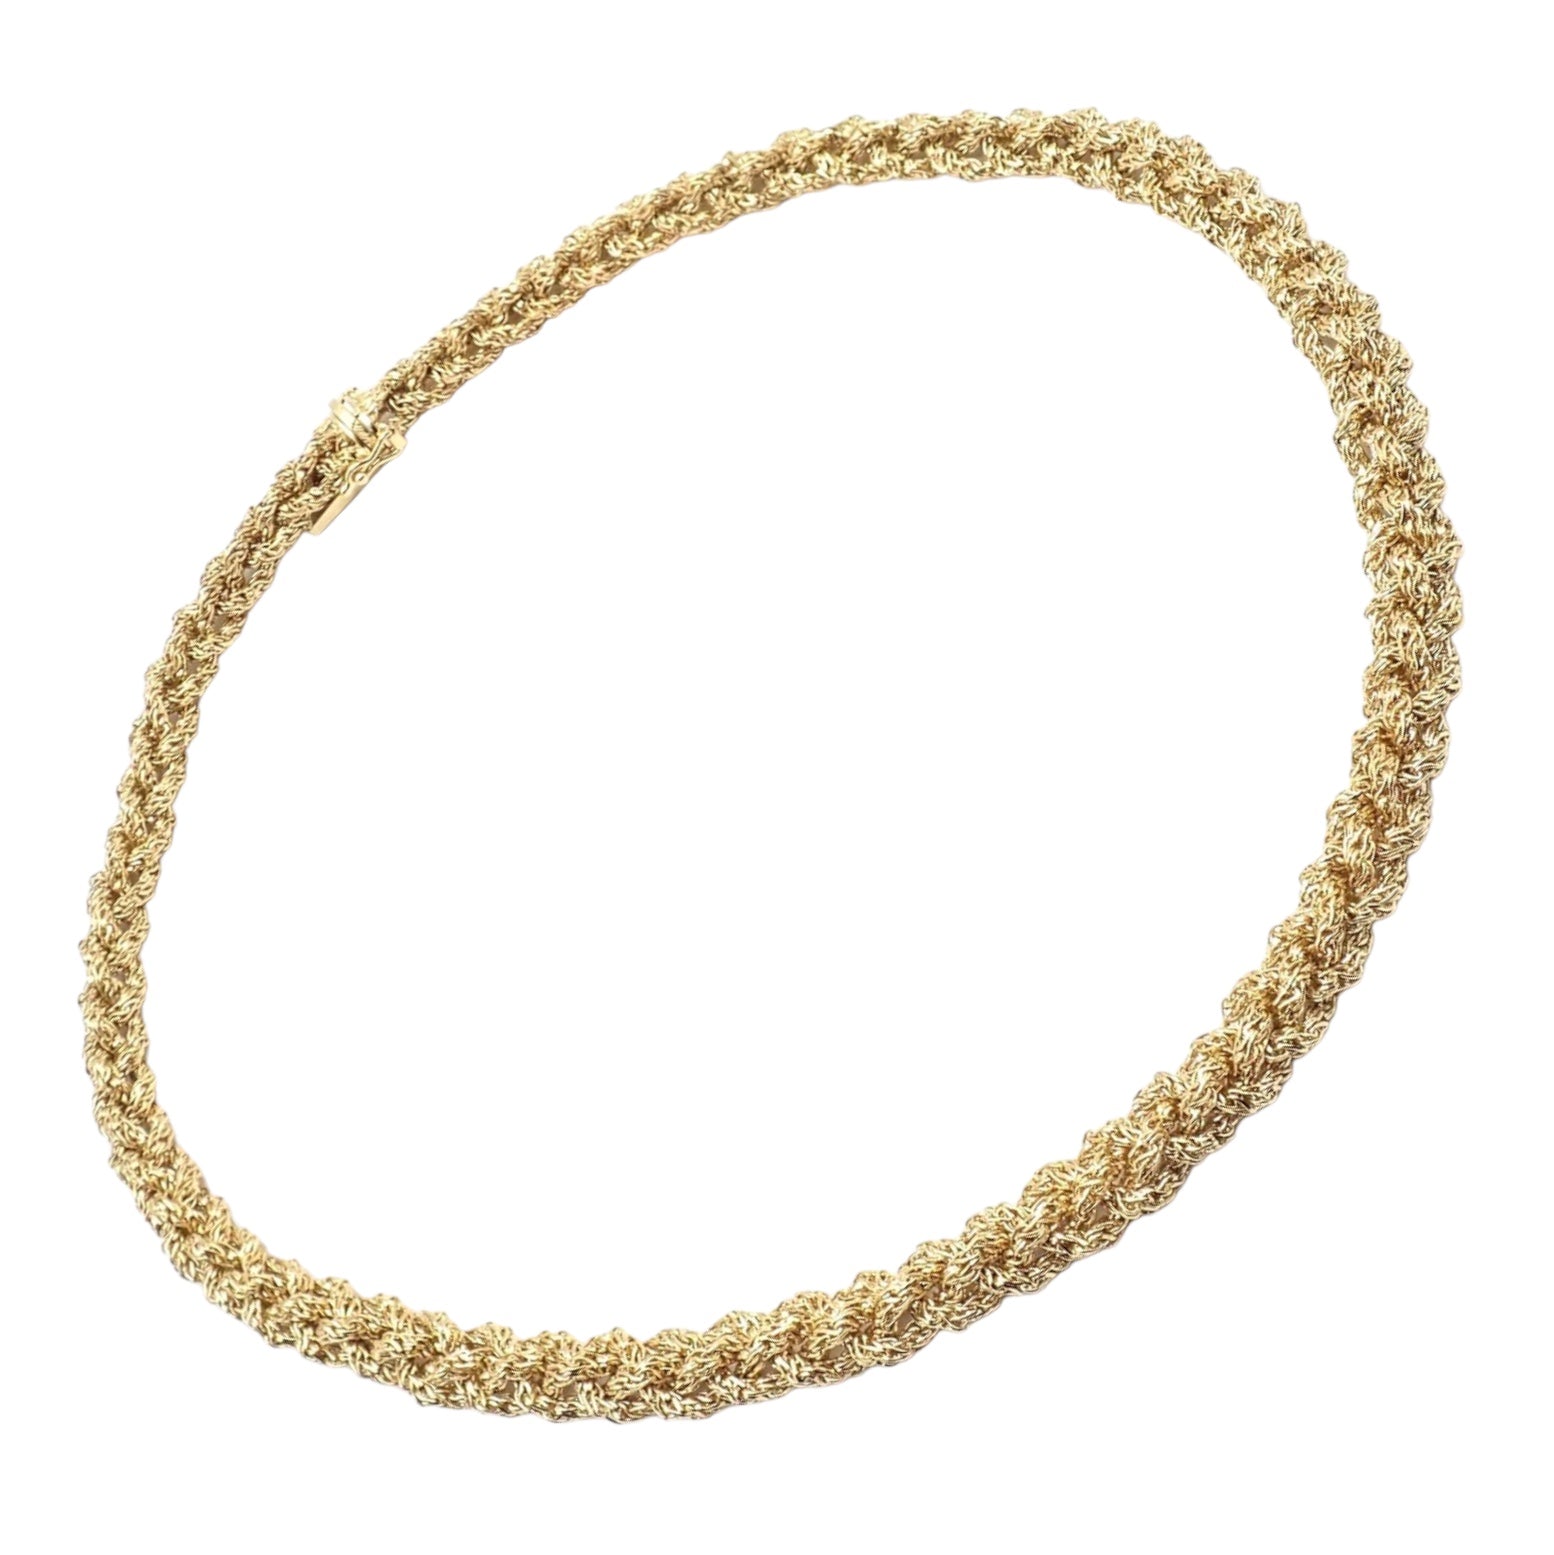 Authentic! Vintage Tiffany & Co 18k Yellow Gold Basketweave Link Chain Necklace